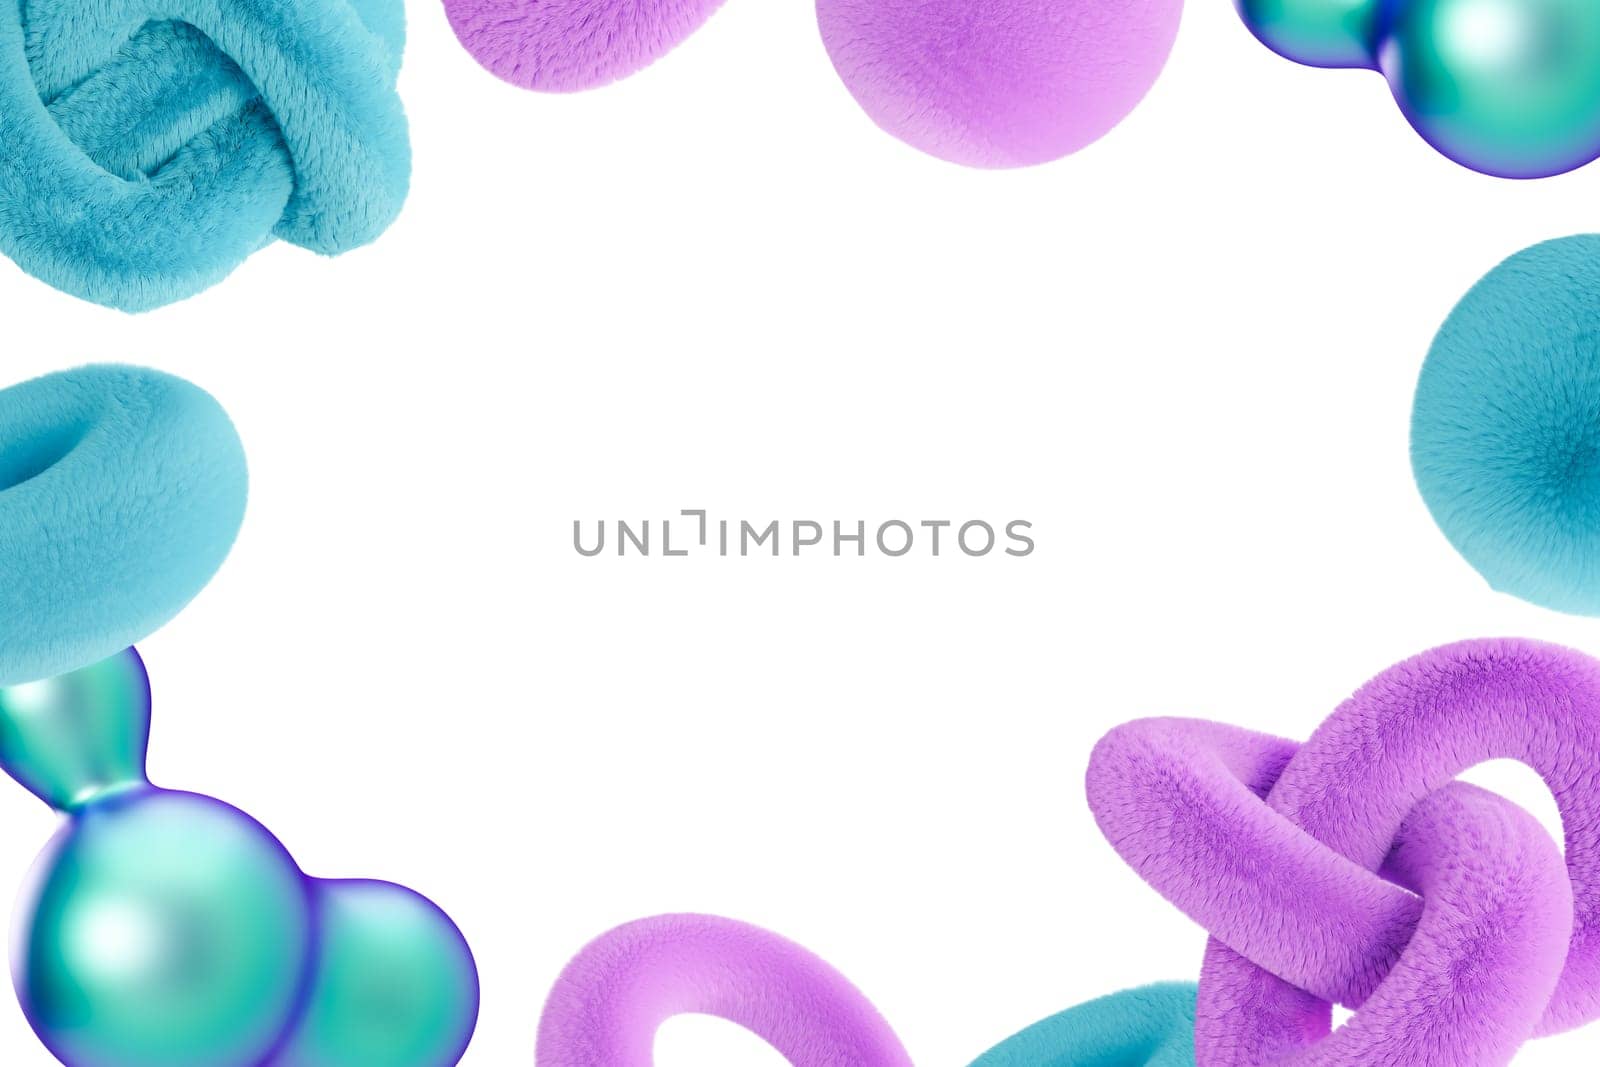 Playful frame with abstract, fluffy and holographic 3D shapes, isolated on white background. Modern border. Y2k style. Copy space in the middle. Color gradient. 3D render